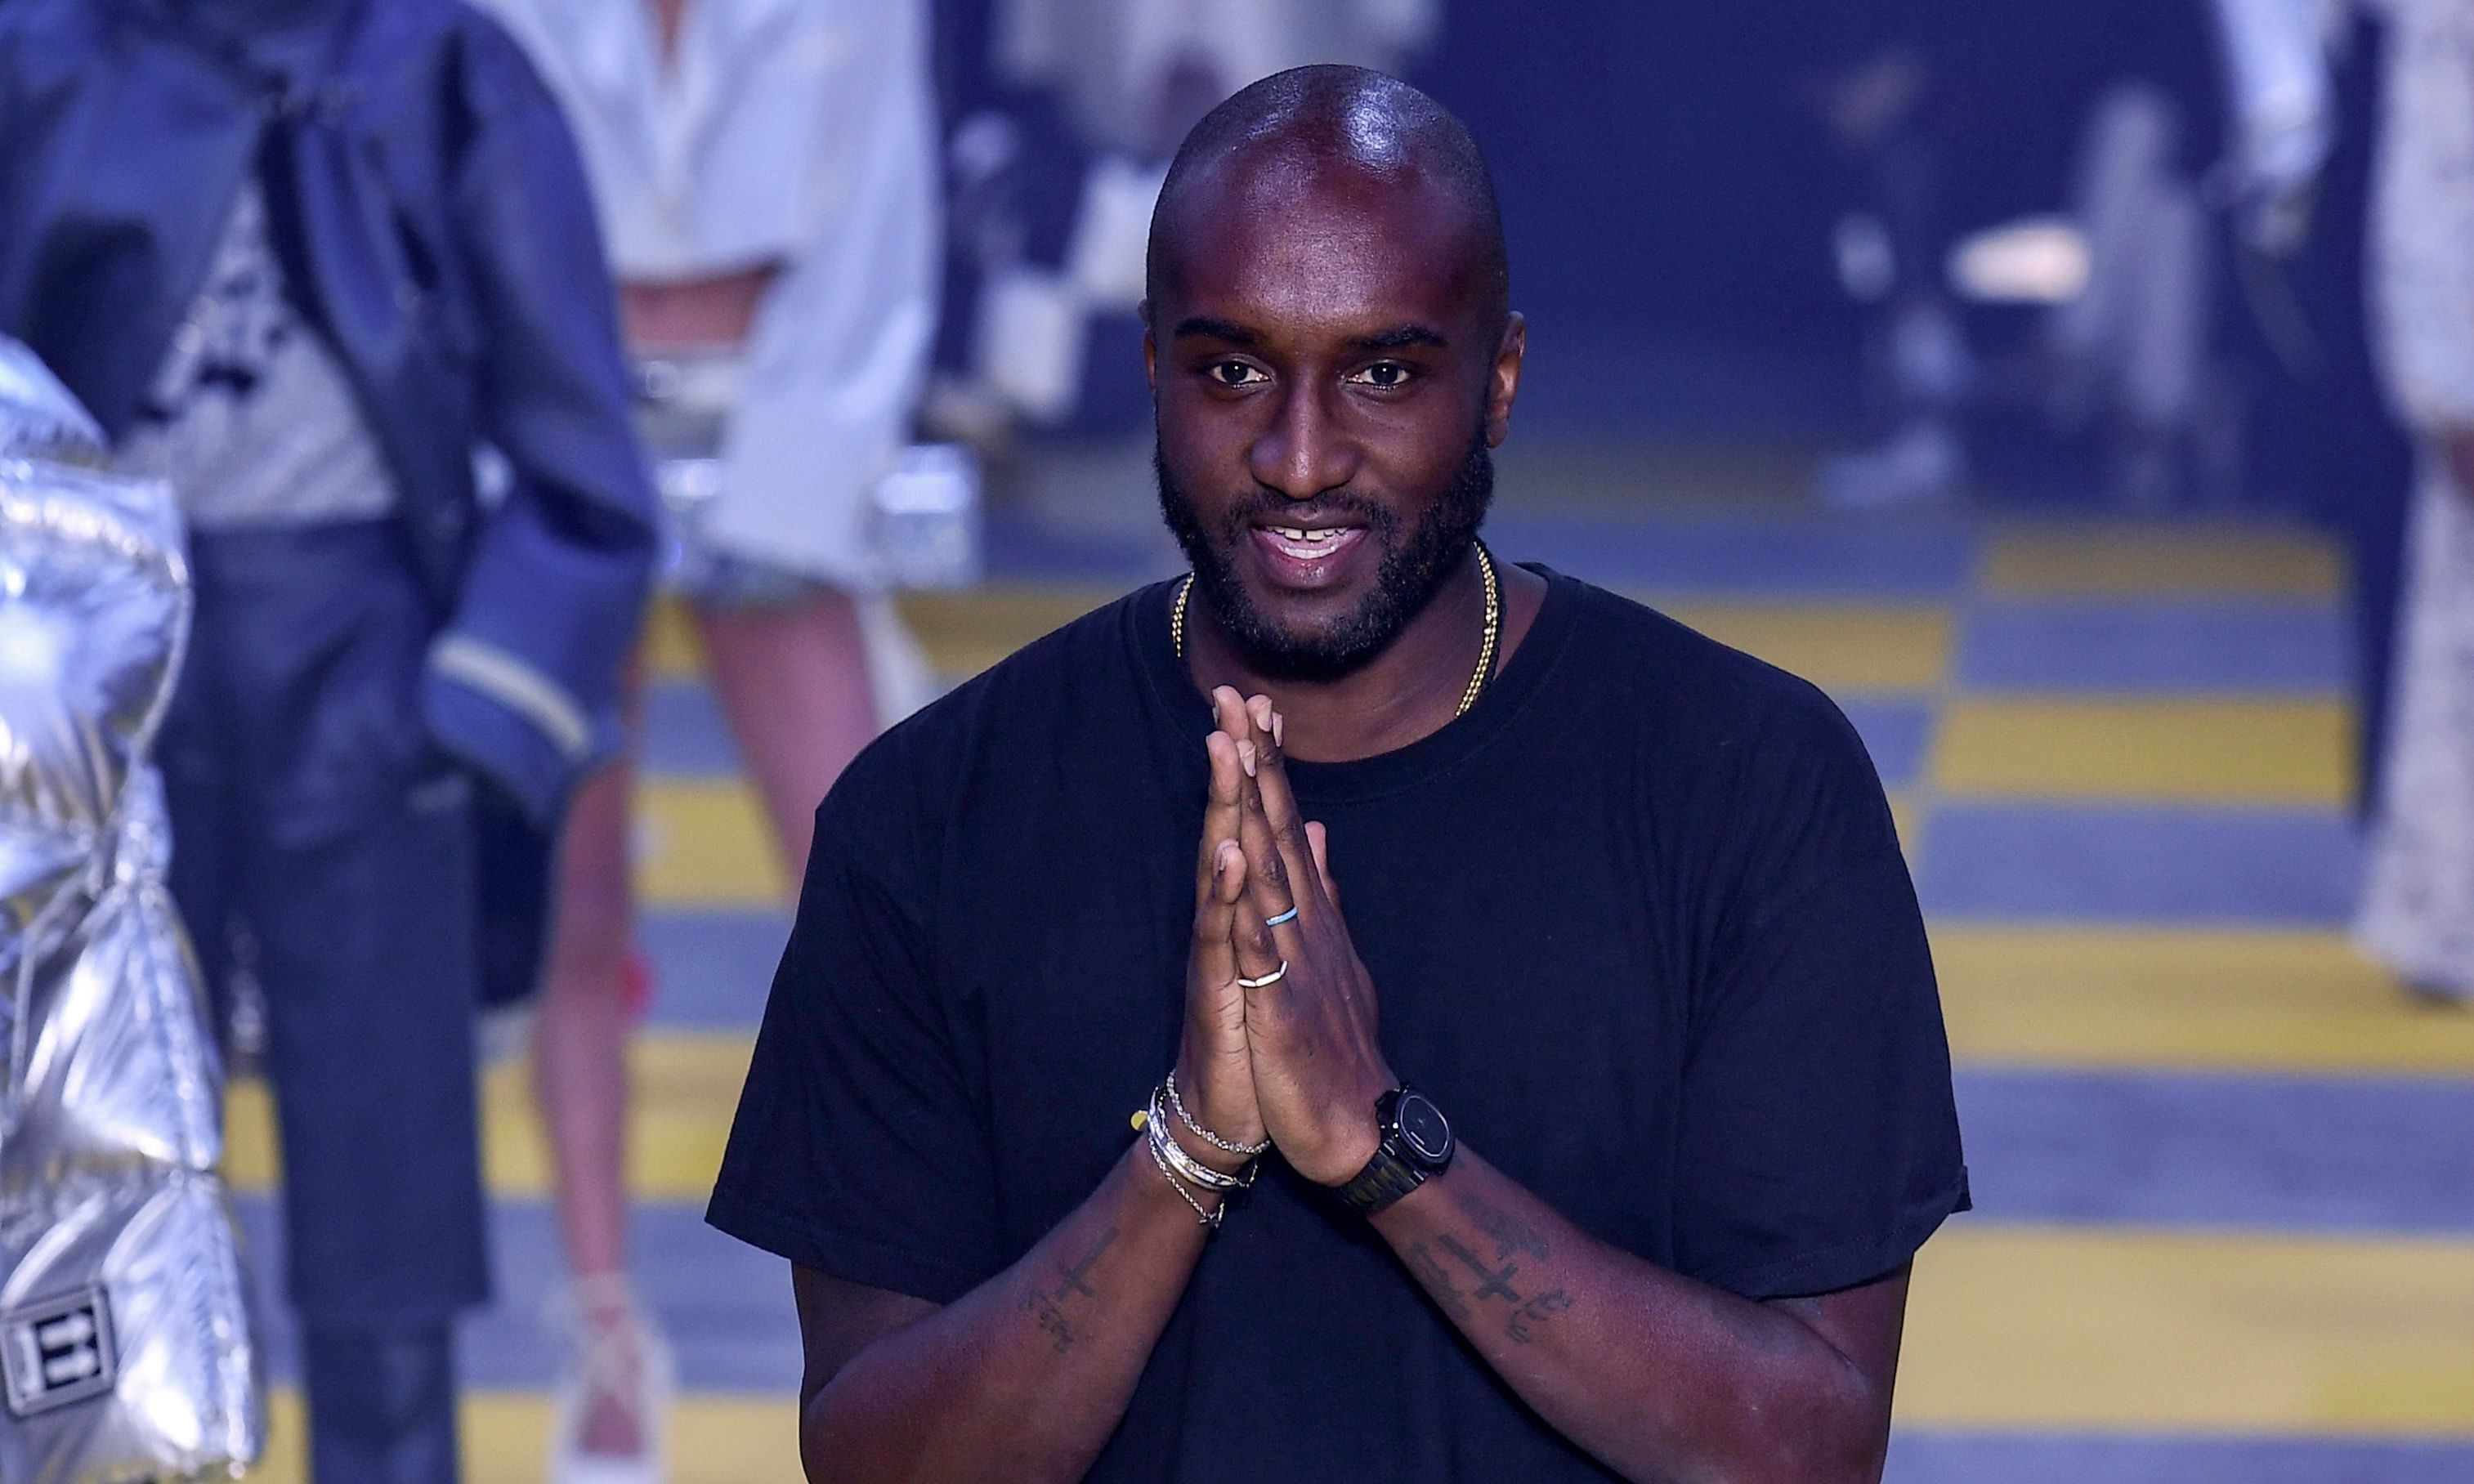 Virgil Abloh, Off-White CEO and Louis Vuitton Artistic Director, dies at 41